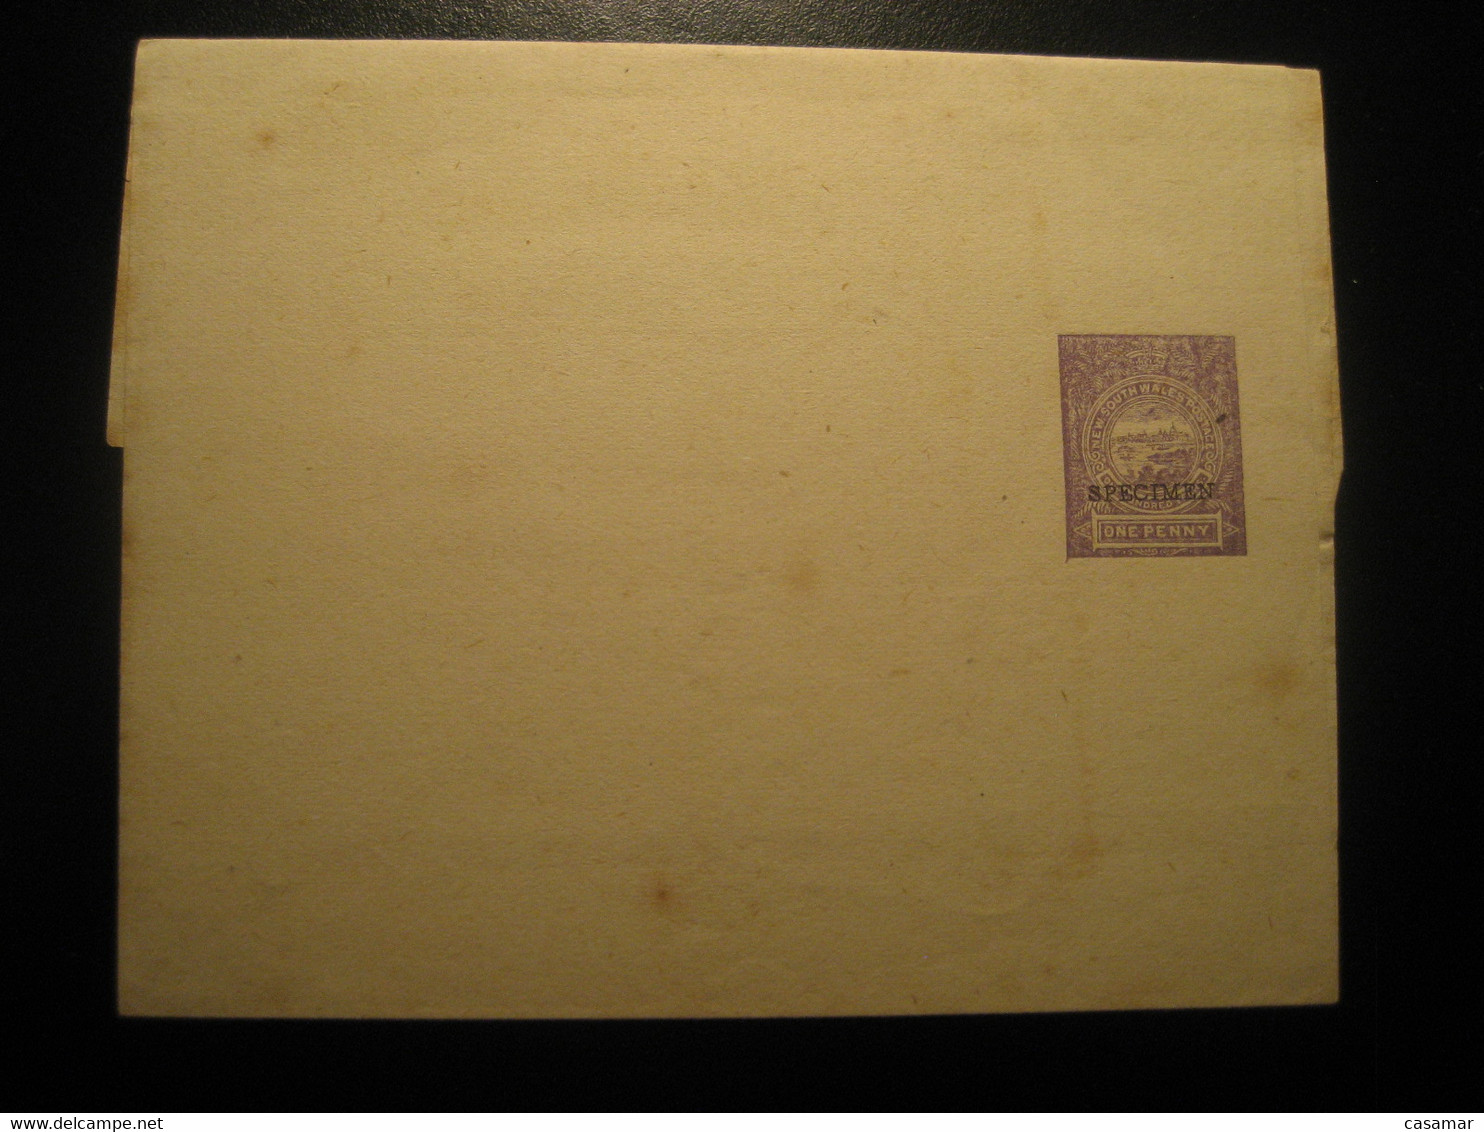 SPECIMEN Overprinted 1 Penny NEW SOUTH WALES Wrapper AUSTRALIA Postal Stationery Cover - Lettres & Documents